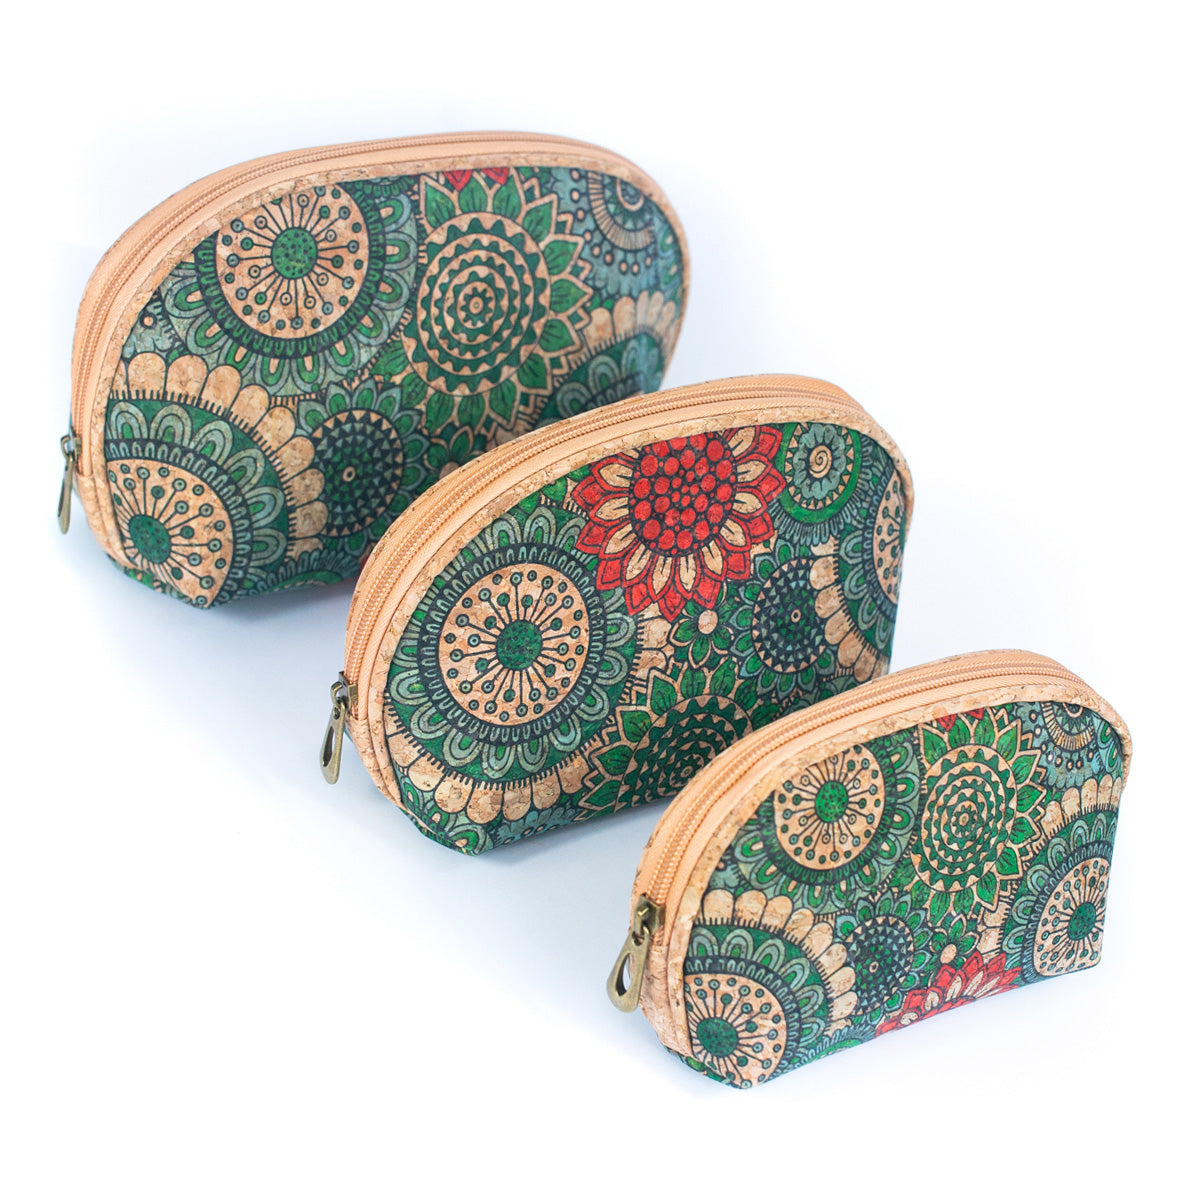 Luxury Women's 3-Piece Cork Cosmetic Bag Set | THE CORK COLLECTION